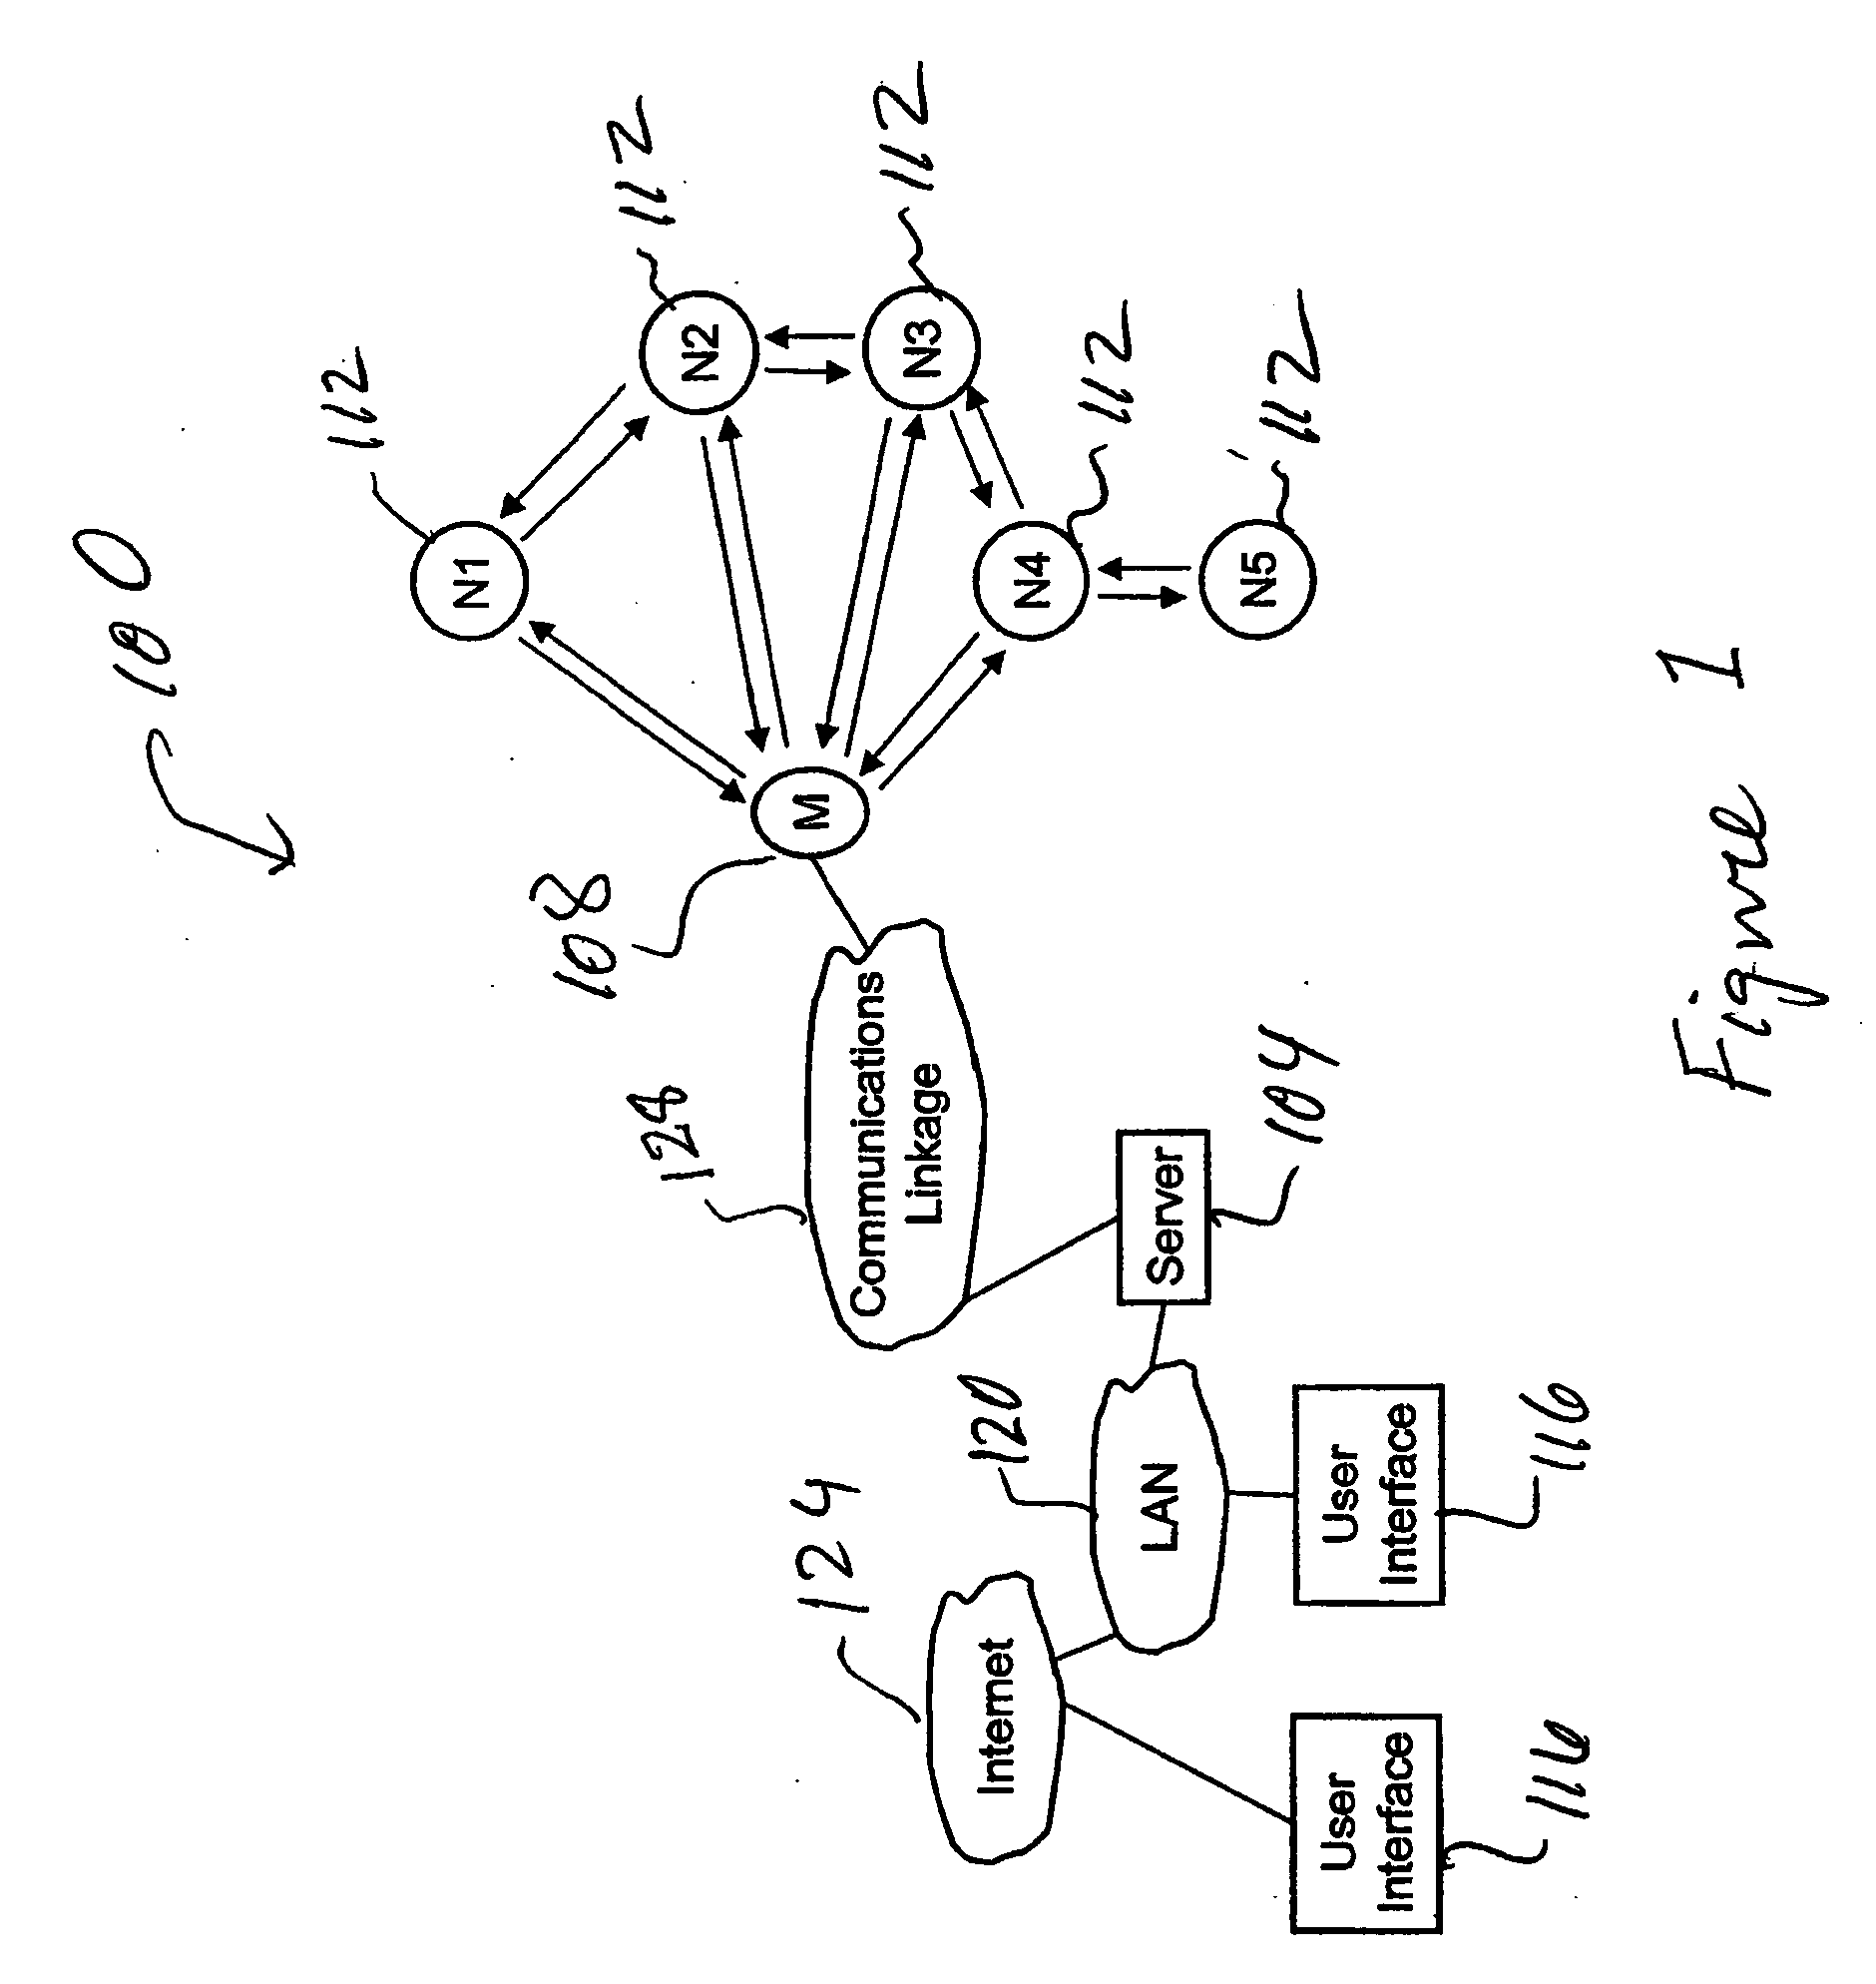 Radio frequency location determination system and method with wireless mesh sensor networks